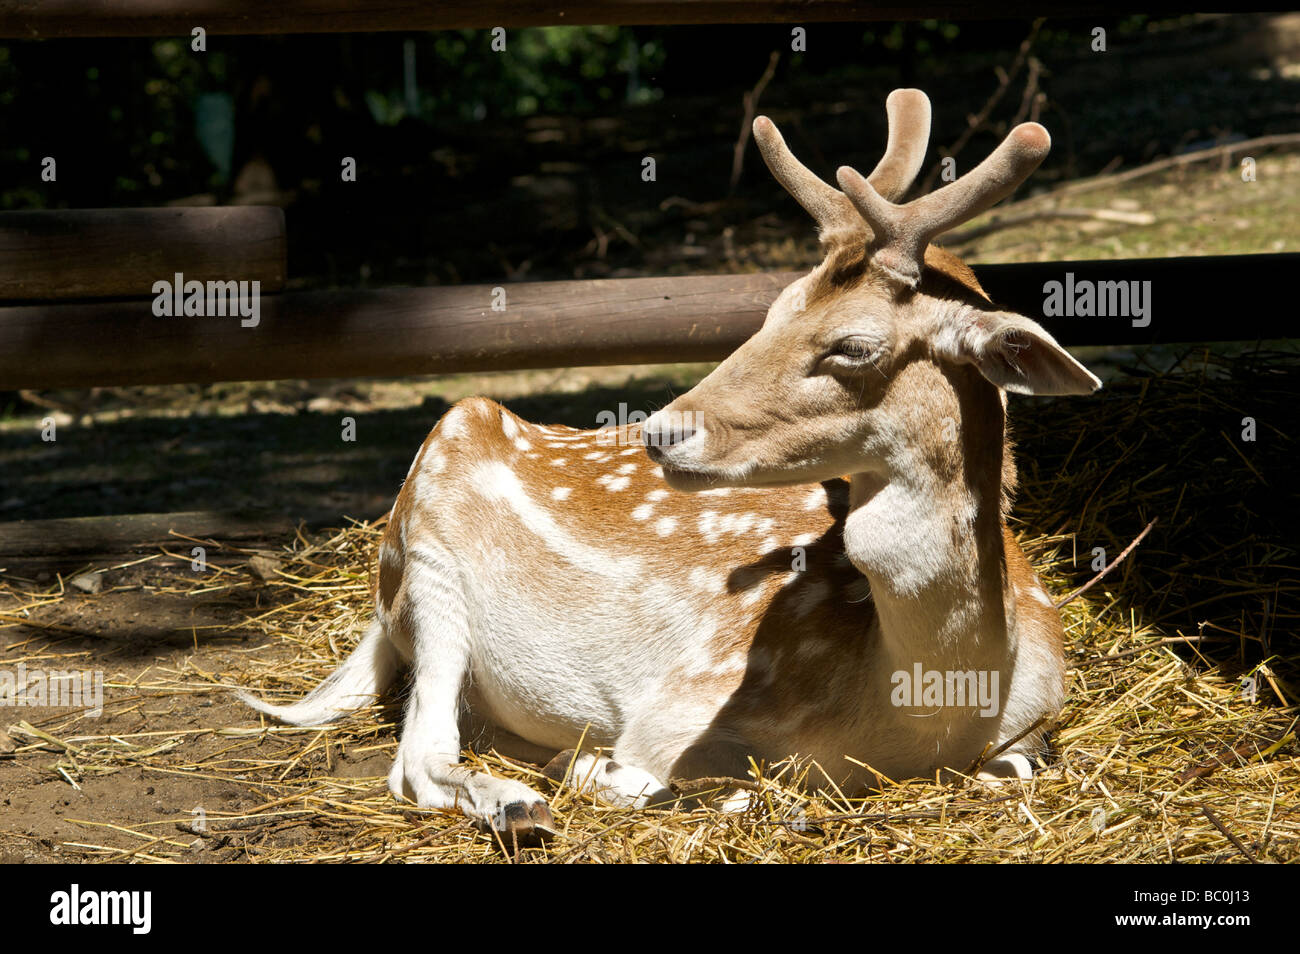 A stag Stock Photo